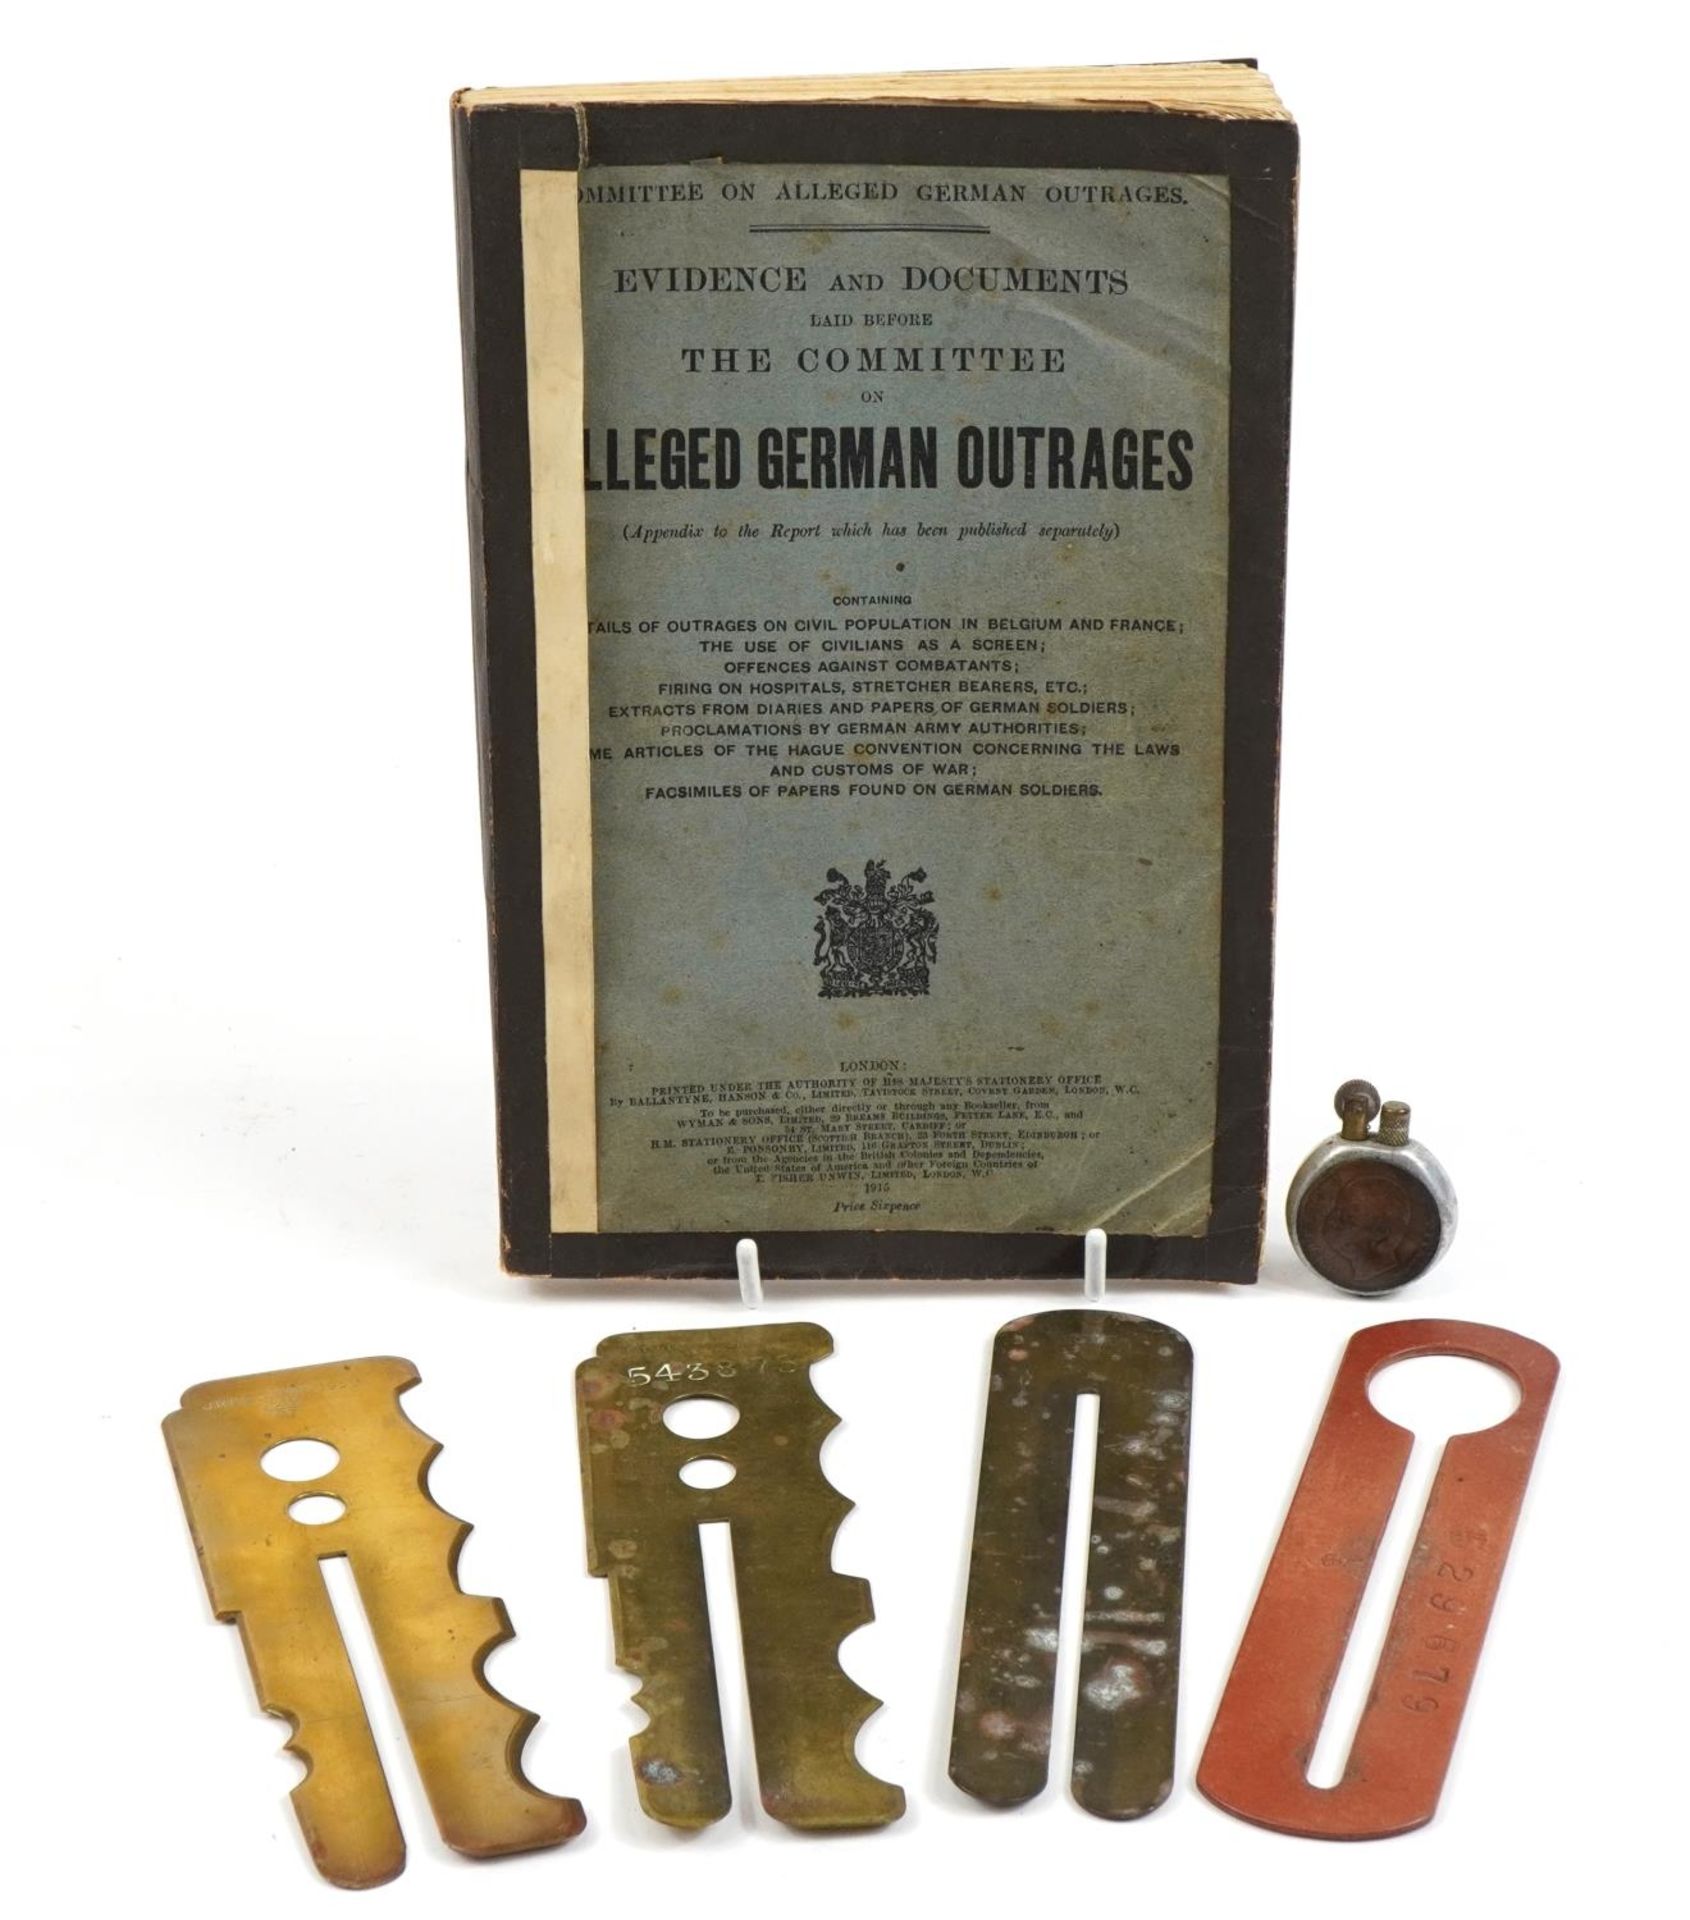 Militaria comprising The Evidence and Documents Laid Before the Committee of Alleged German